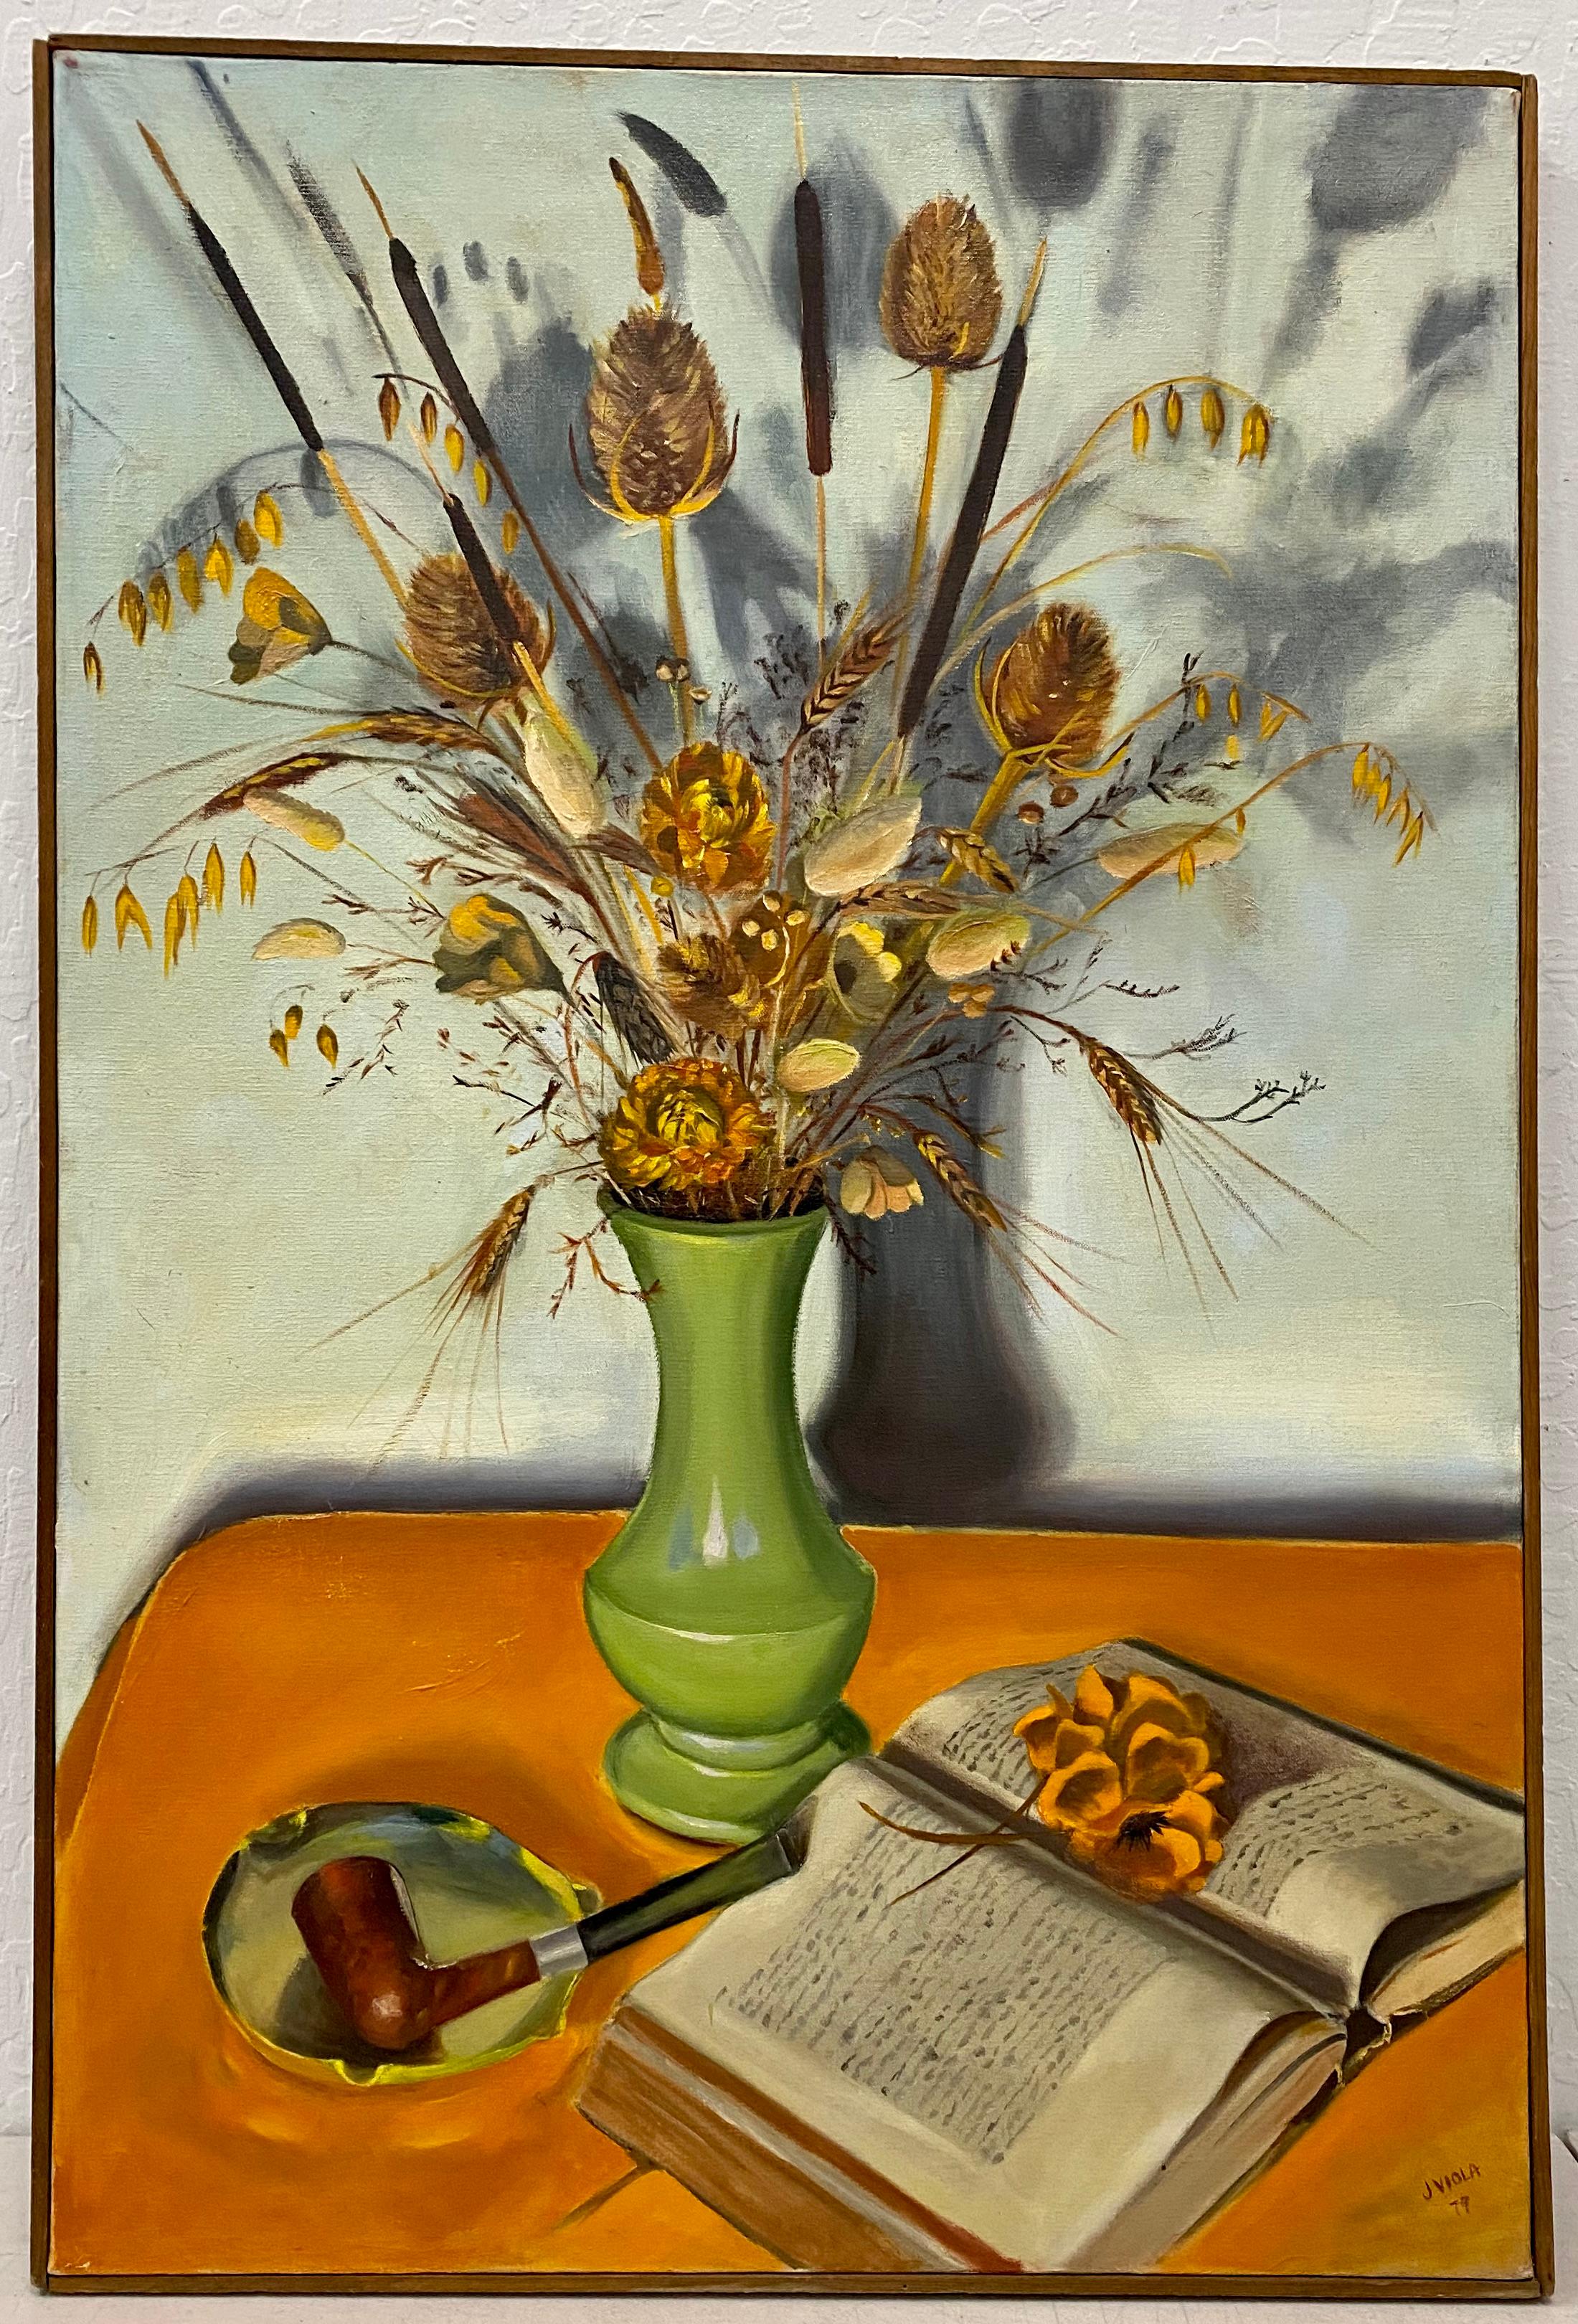 Unknown Still-Life Painting - Vintage Still Life Oil Painting With Dried Flowers in a Green Vase by J. Viola C